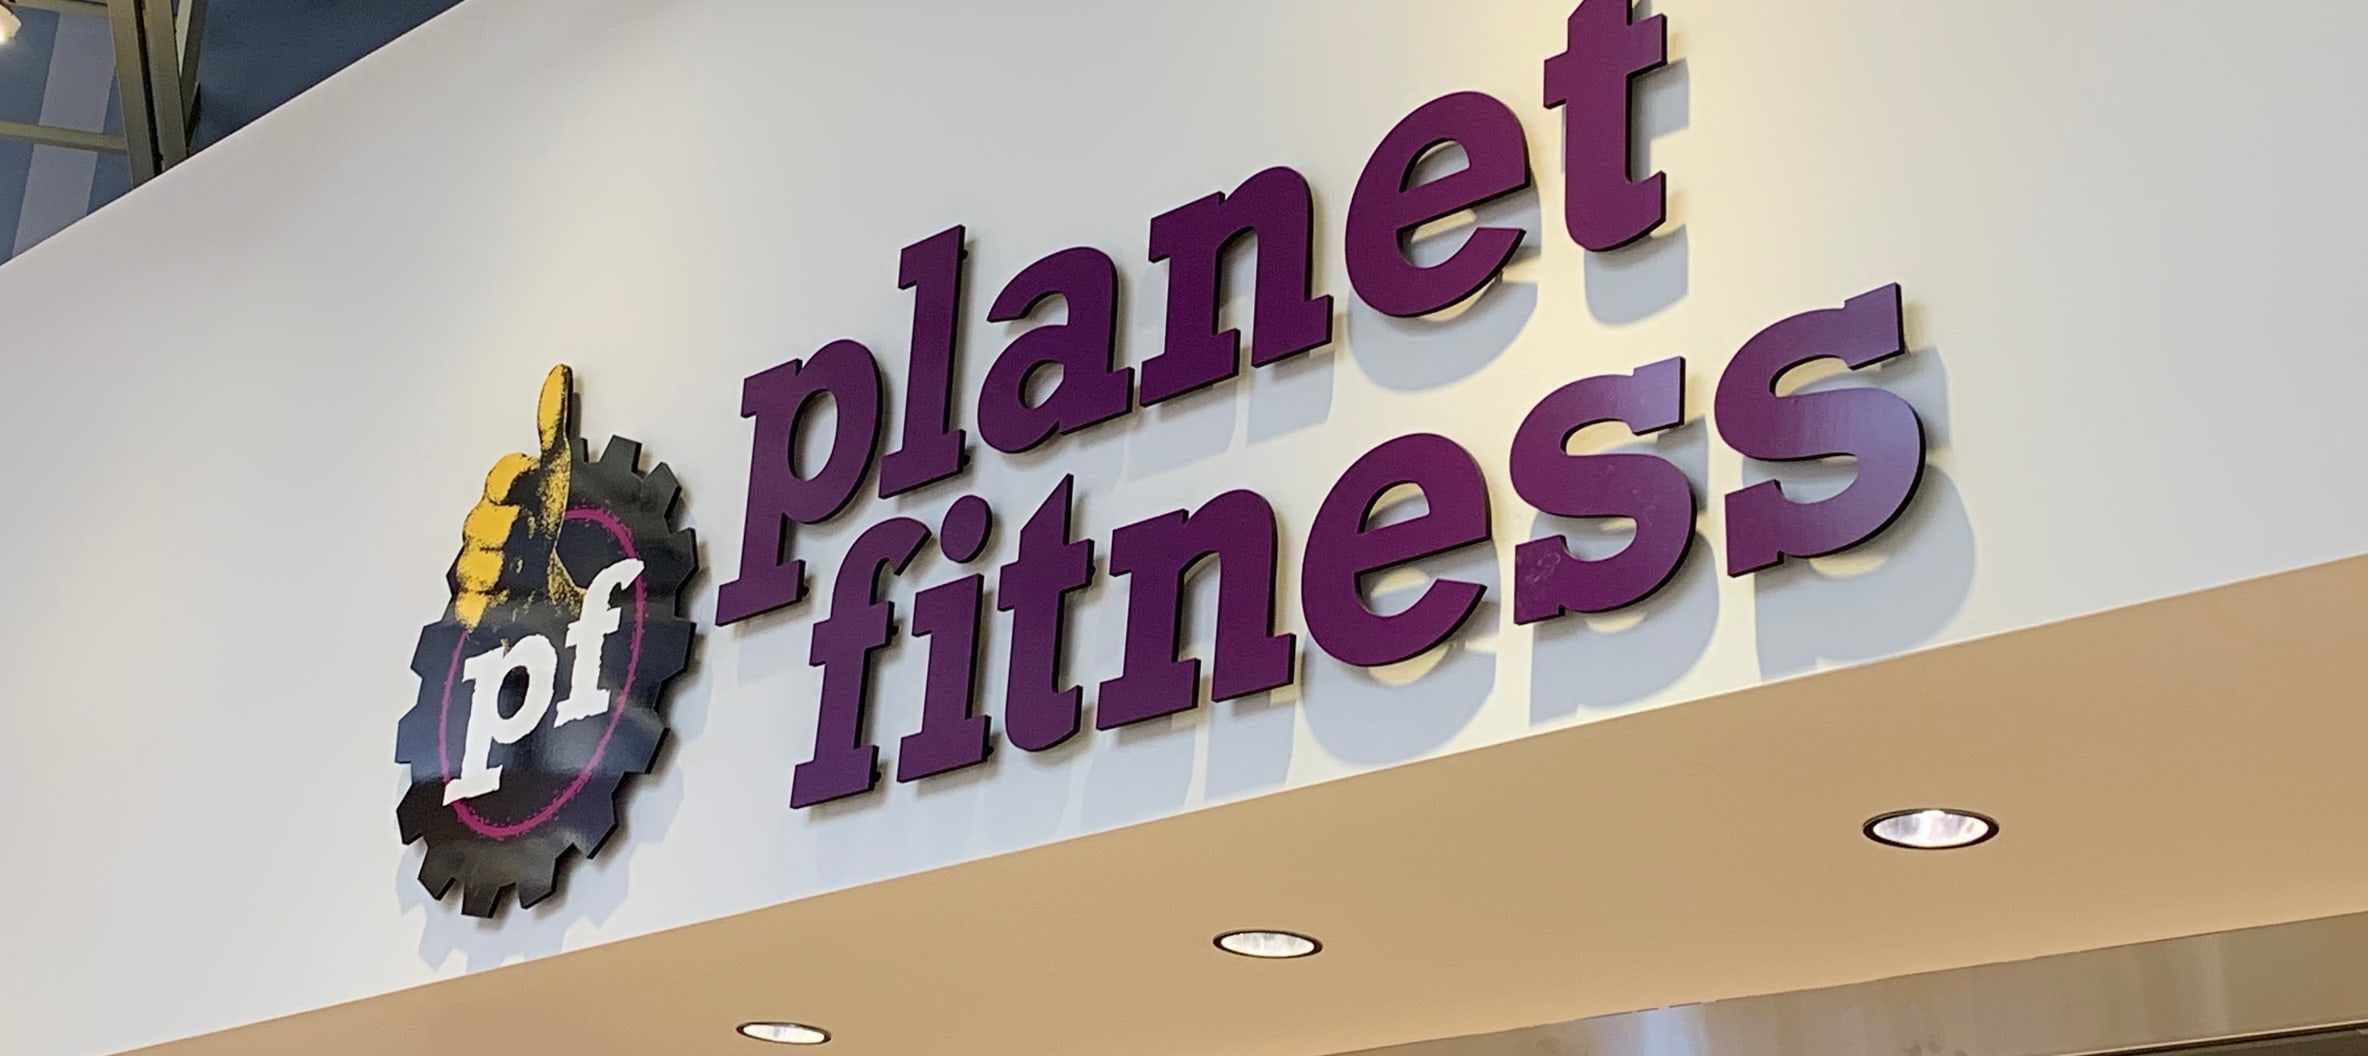 15 Minute Planet Fitness Black Card Guest Rules for Burn Fat fast